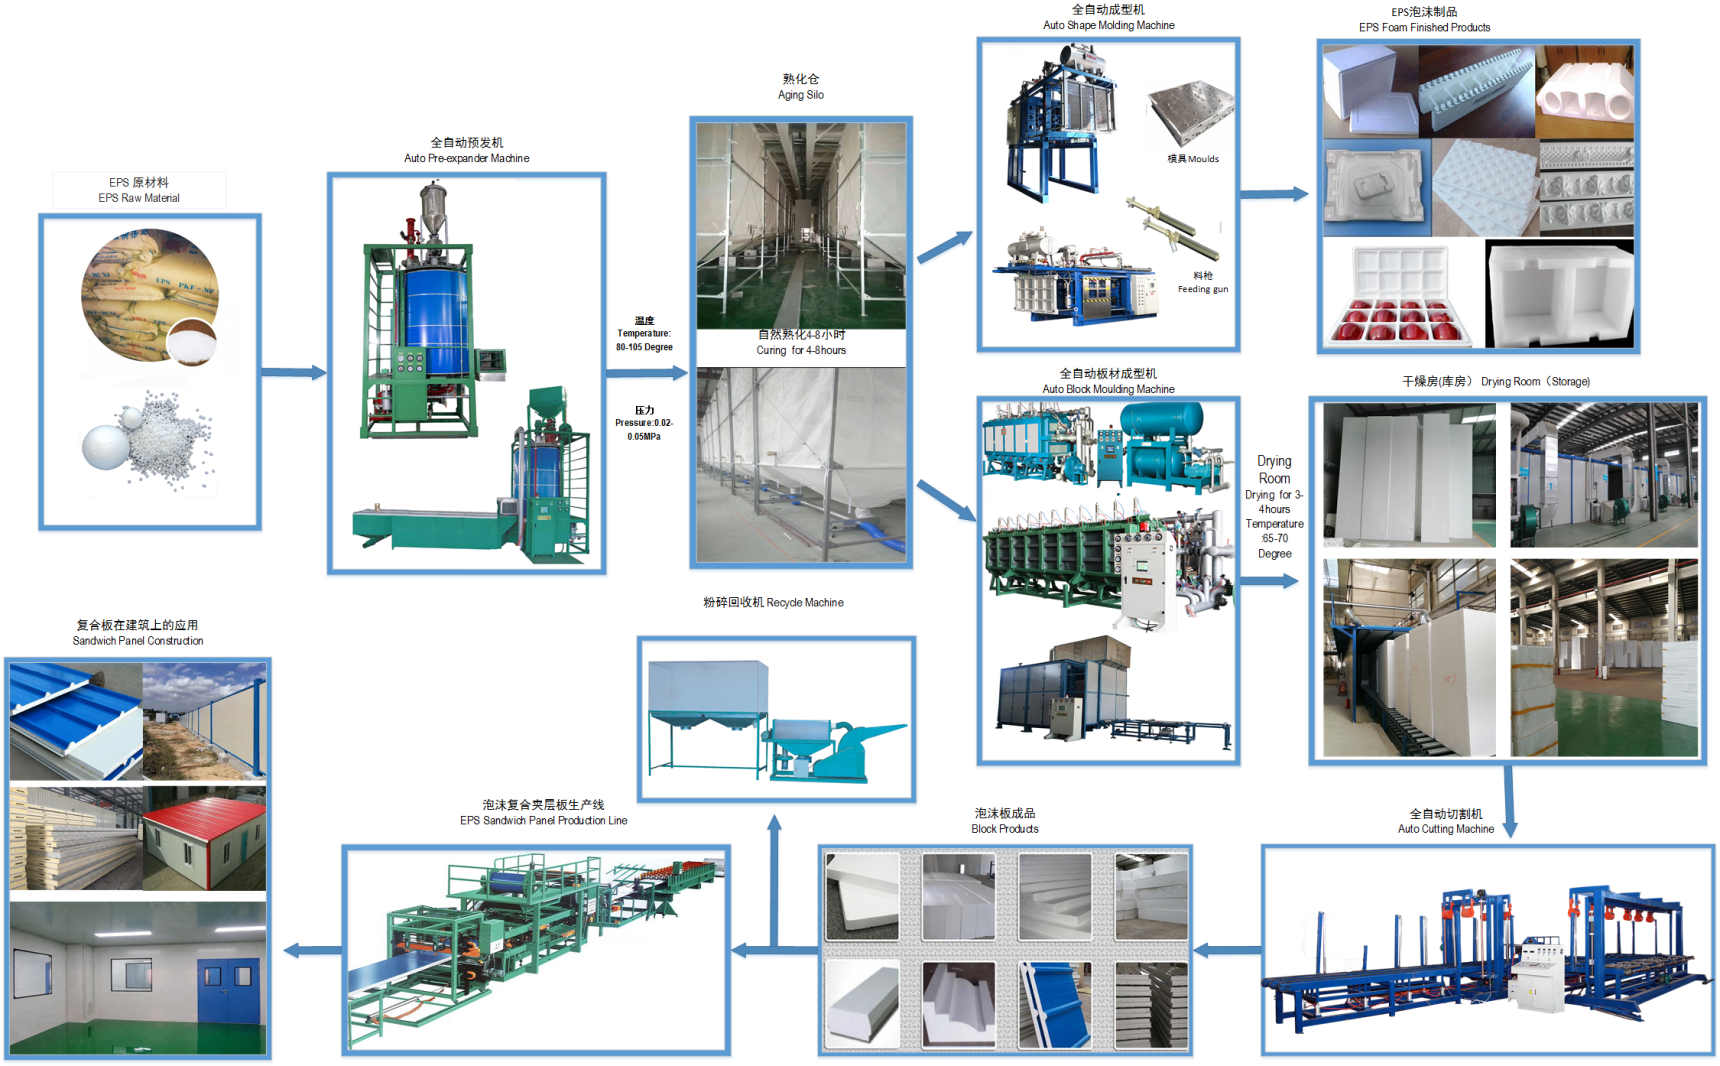 DONGSHAN Patent expandable polystyrene eps foam plastic forming machine with vacuum system